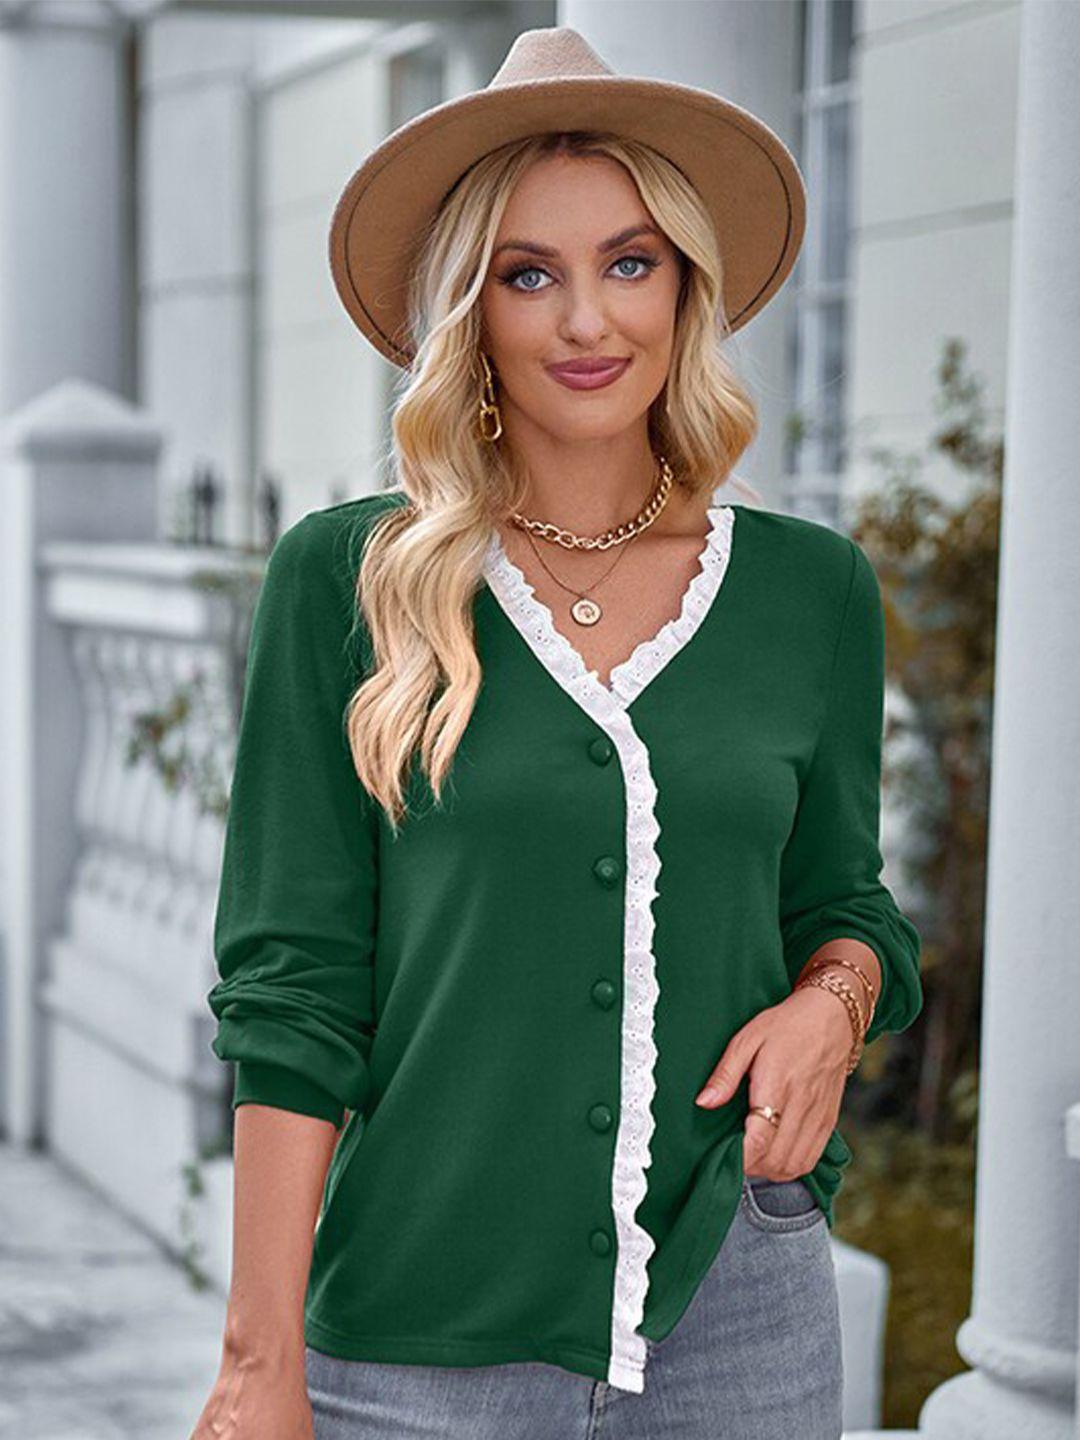 stylecast green cuffed sleeves shirt style top